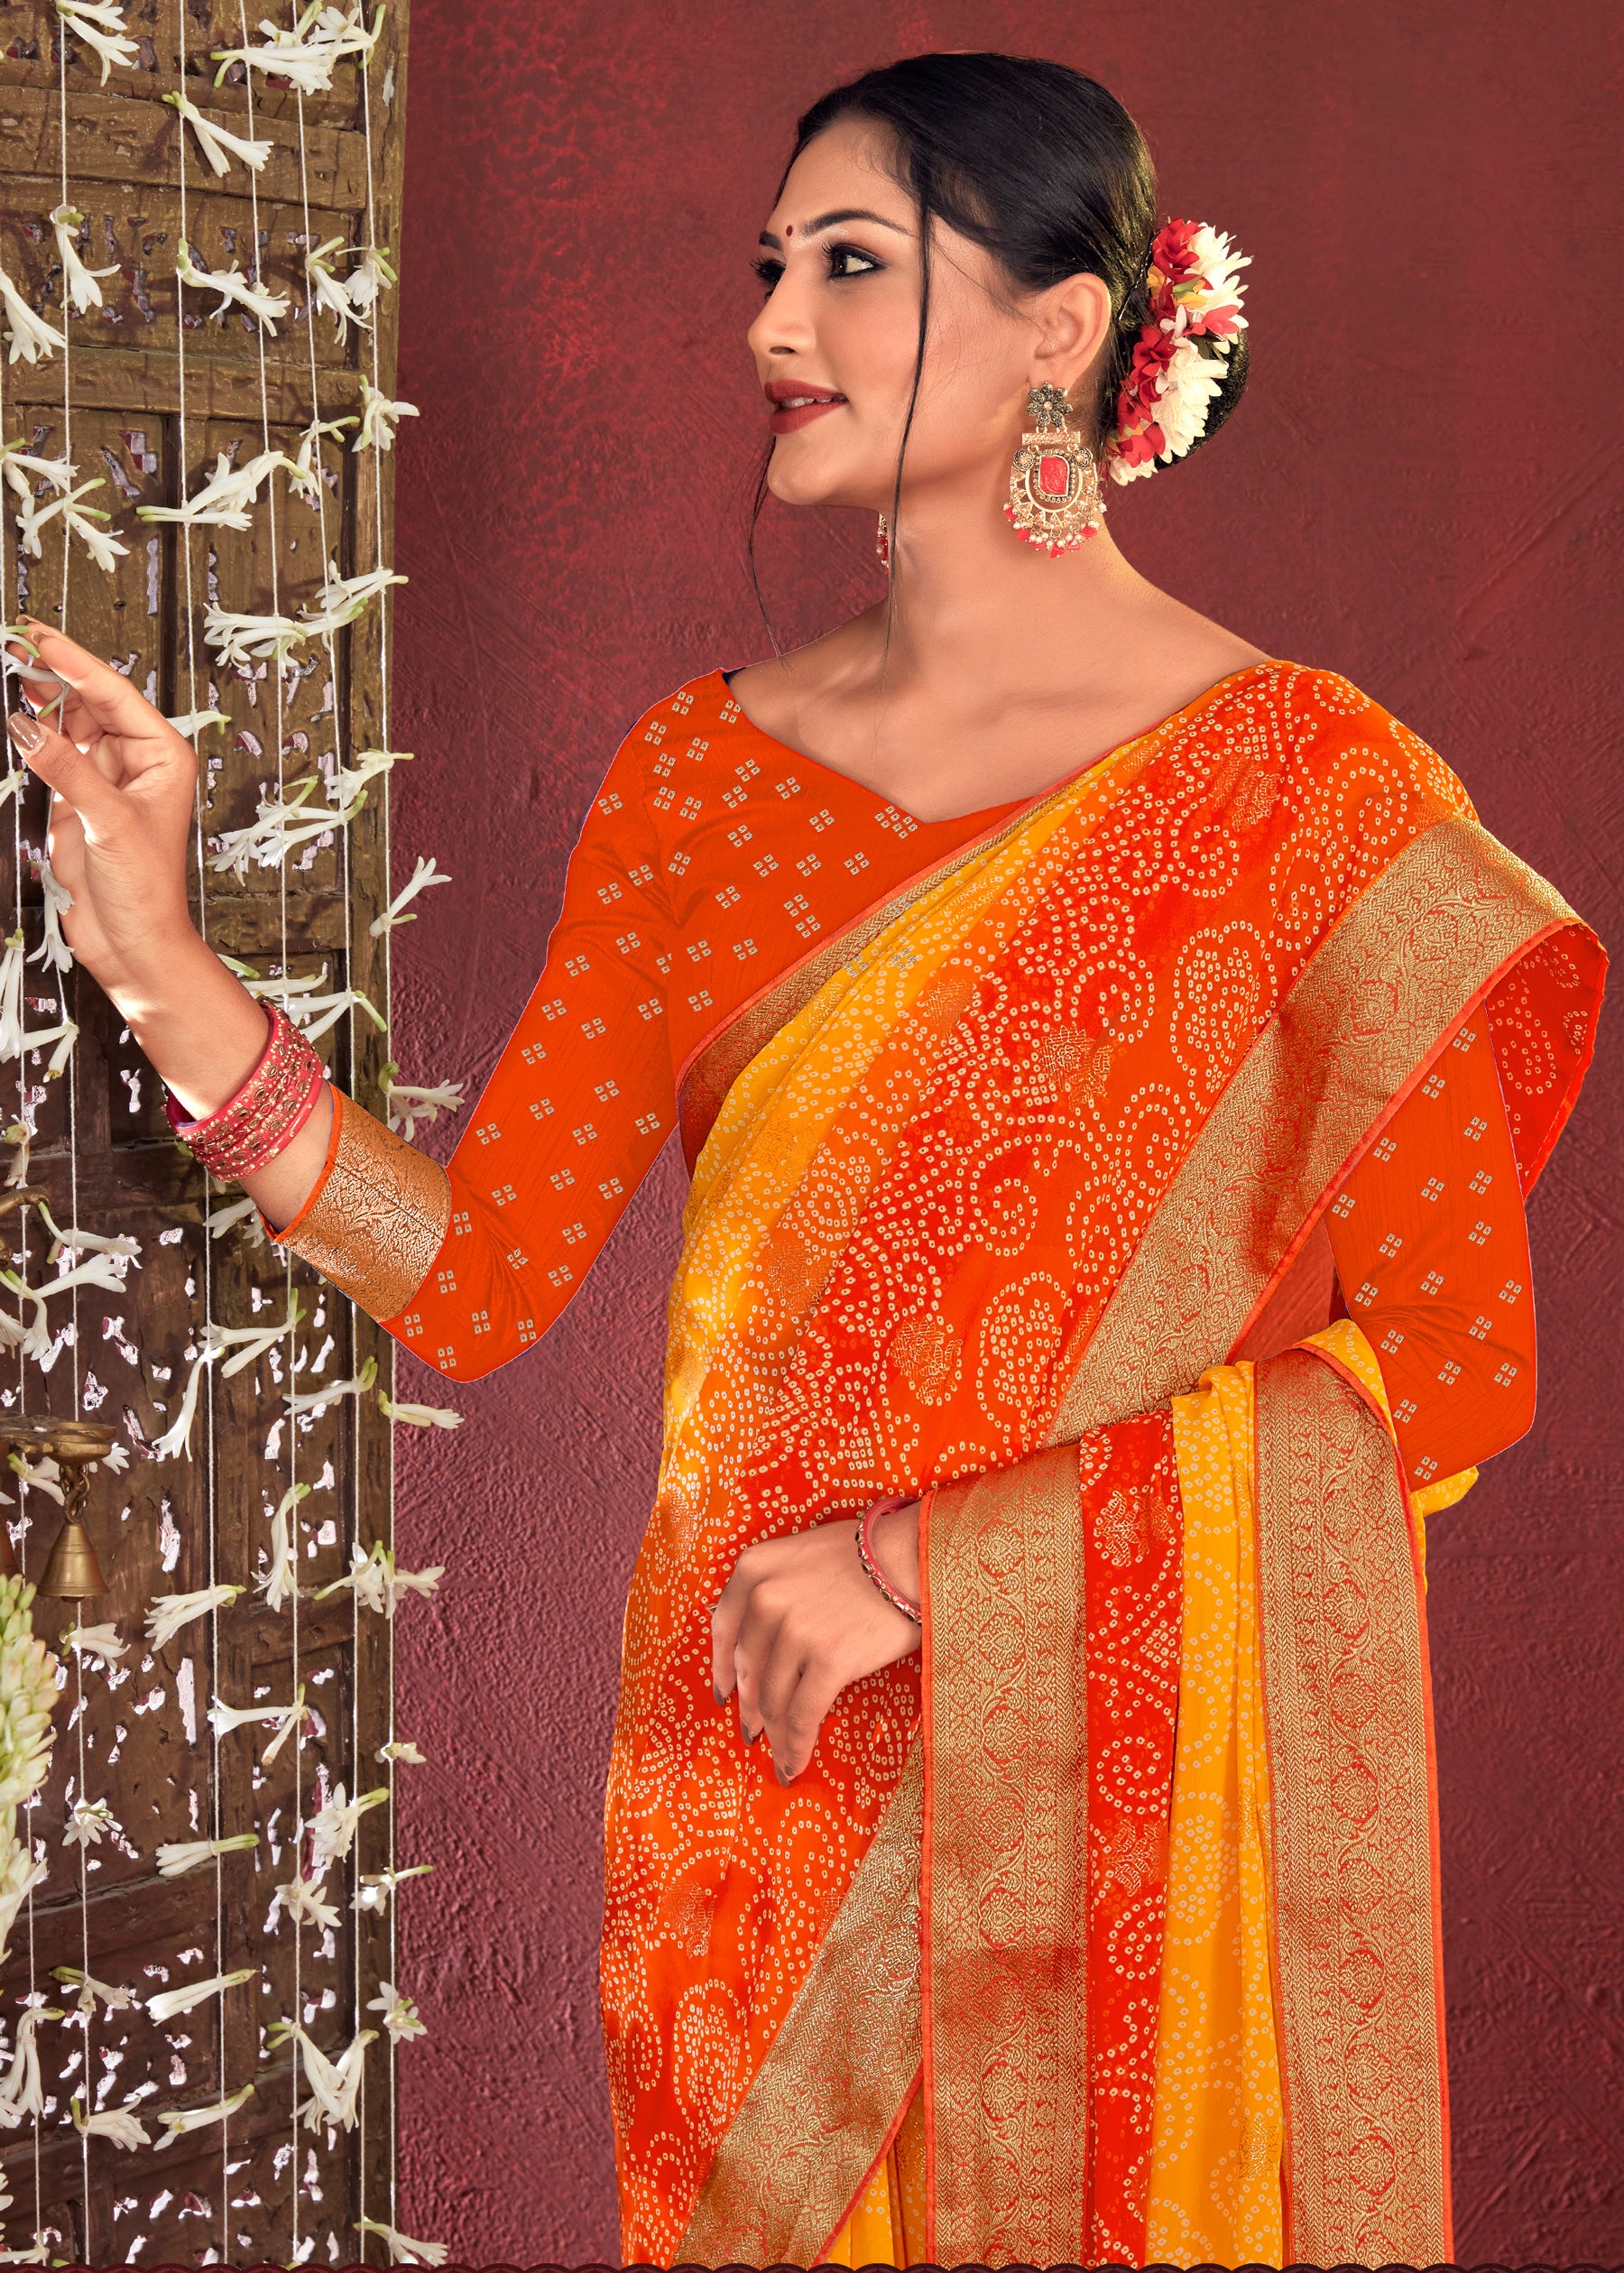 Dual Shades Bandhani Printed Orange Yellow Weightless Georgette Saree With Embroidery Lace